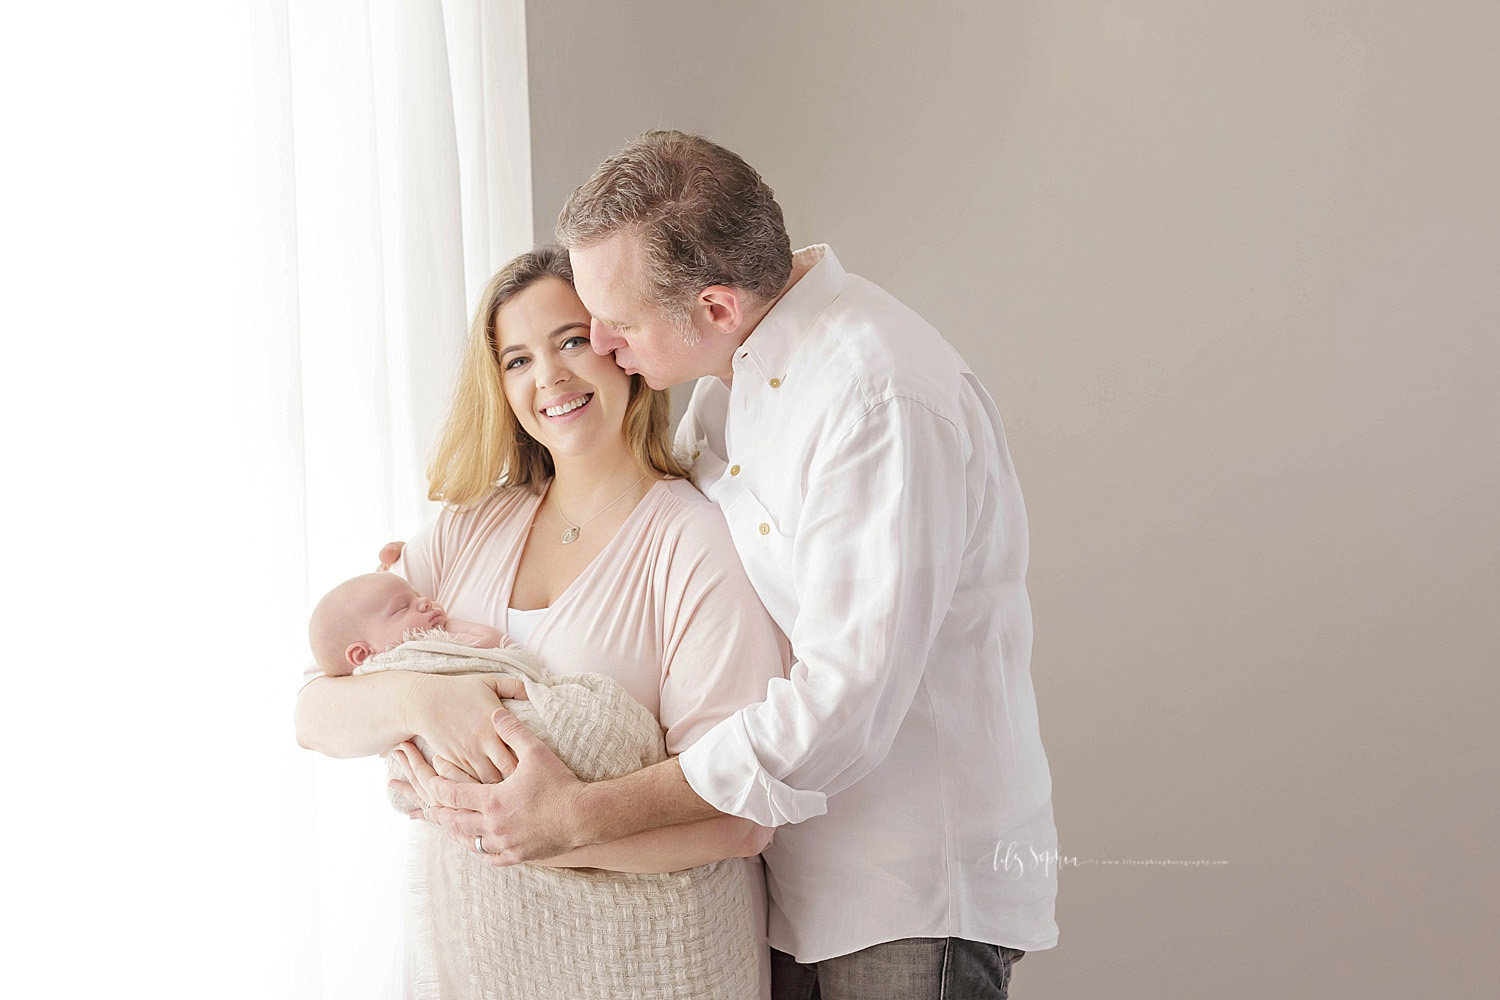  Image of a family of three. The mother is wearing a light pink dress and holding her sleeping, newborn son. The father is standing behind her, kissing her cheek, with one hand on the baby, and the other hand on her shoulder. &nbsp; 